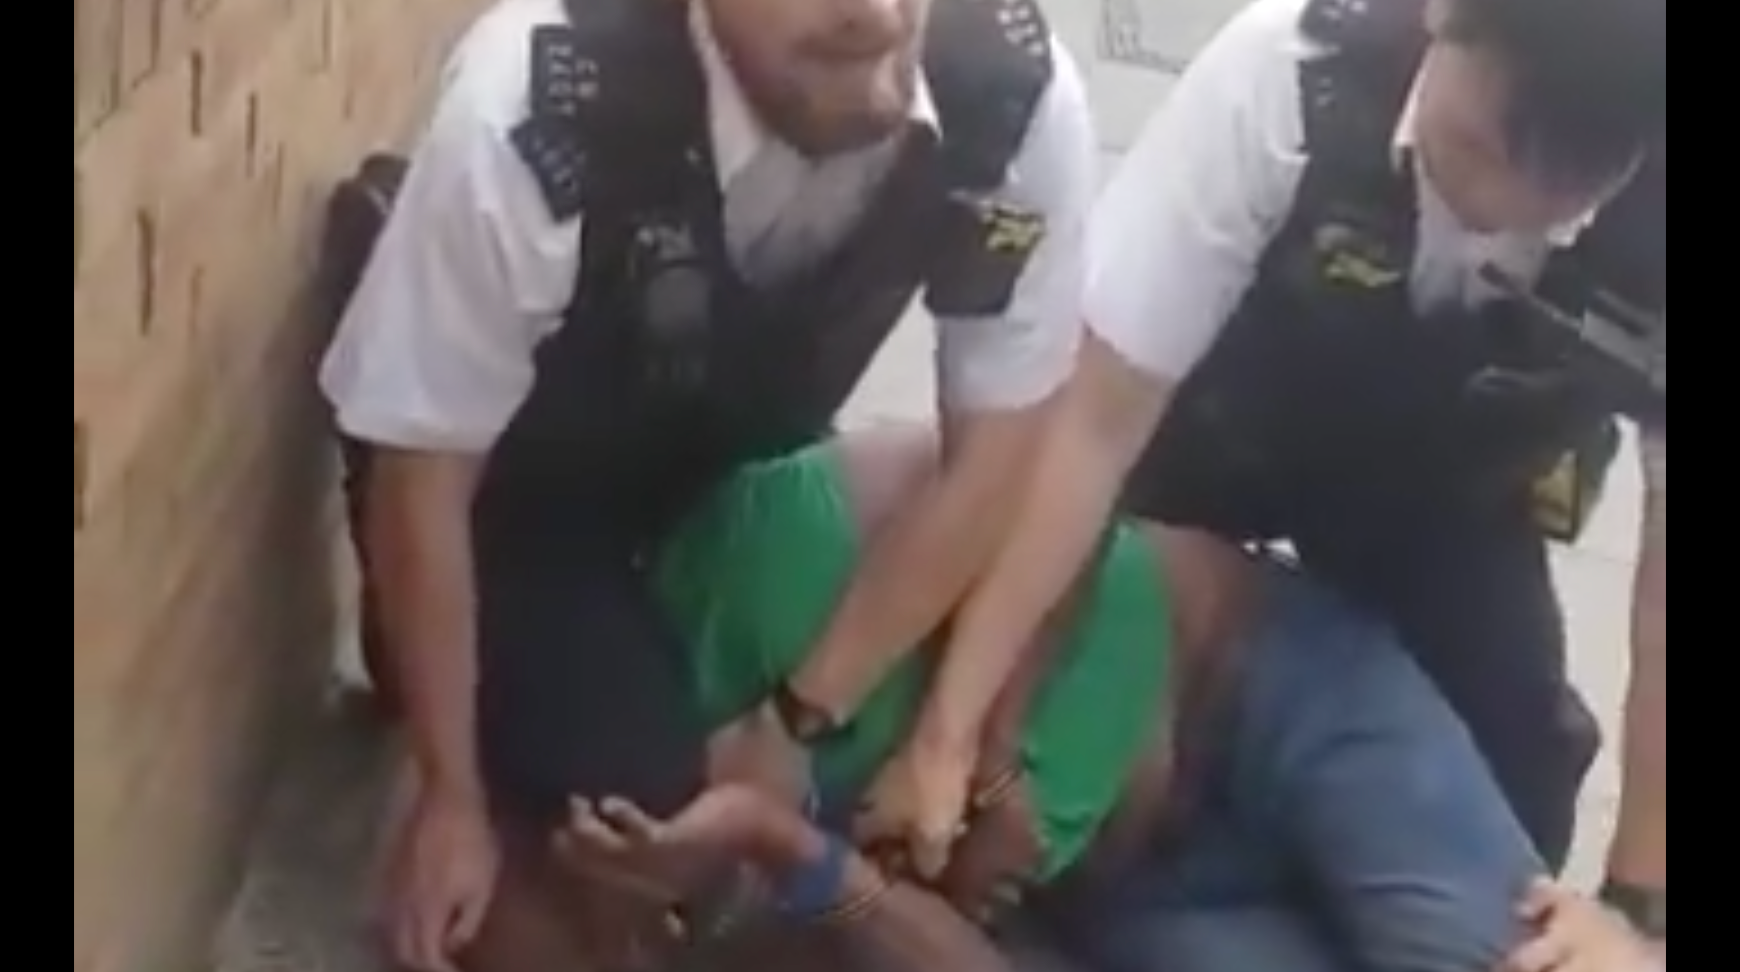 “Get off my neck”: Protest at Islington police station, 12 noon Saturday 18 July